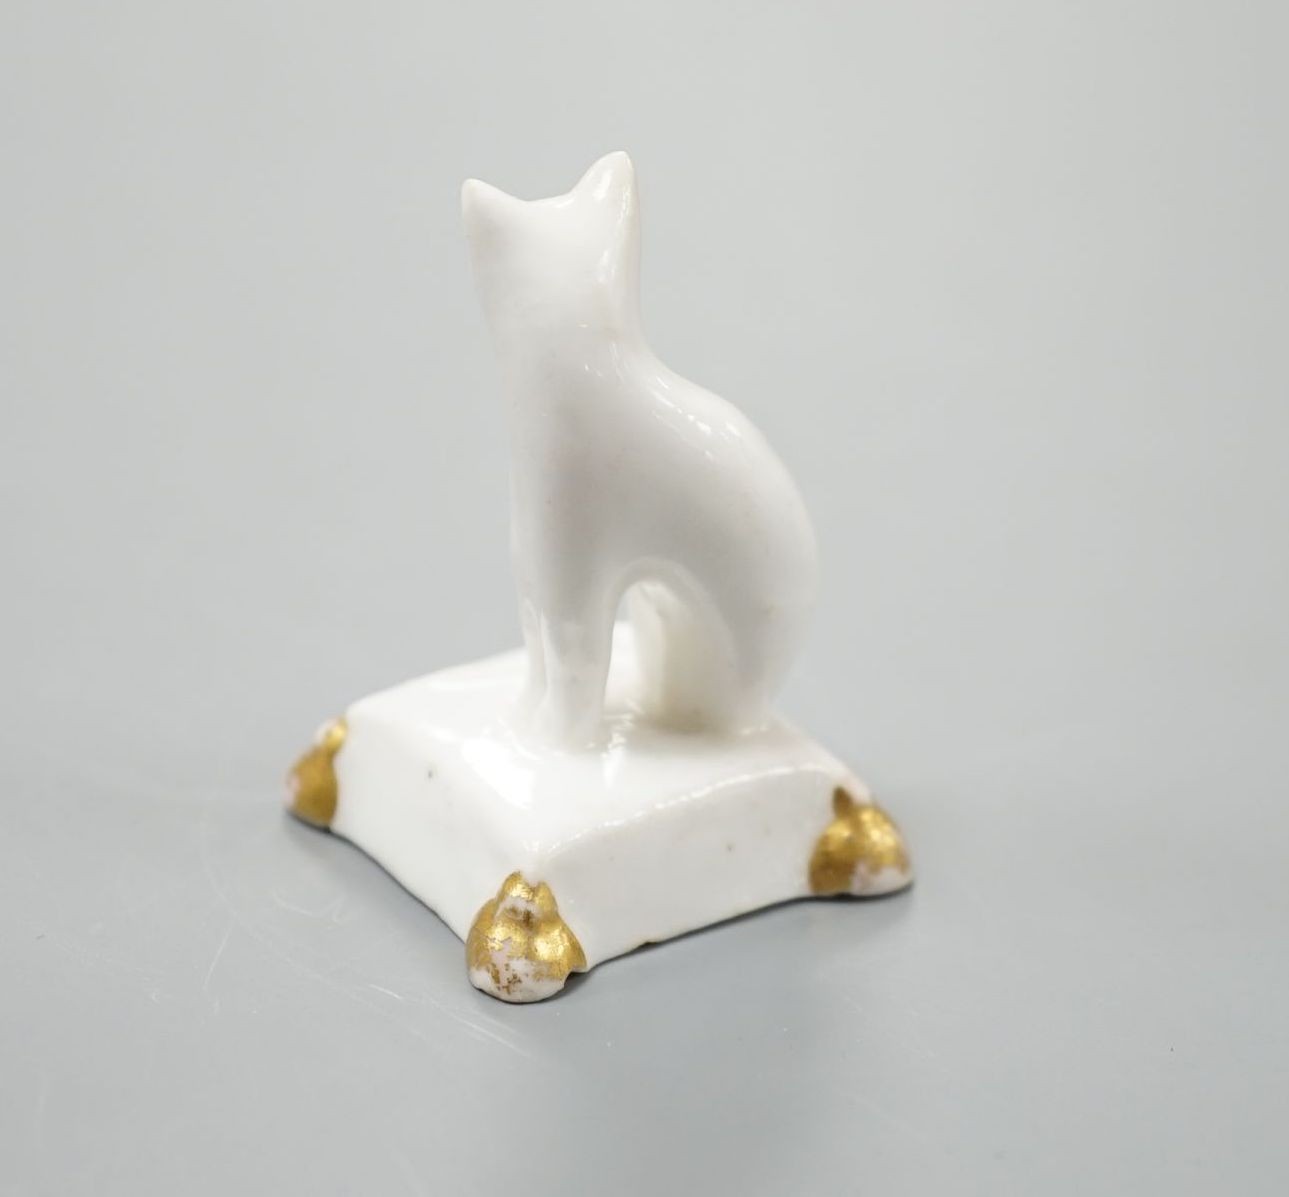 A rare English porcelain model of a cat seated on a cushion base, possibly Derby, c.1820-30, 4cm high, Provenance: Dennis G.Rice collection